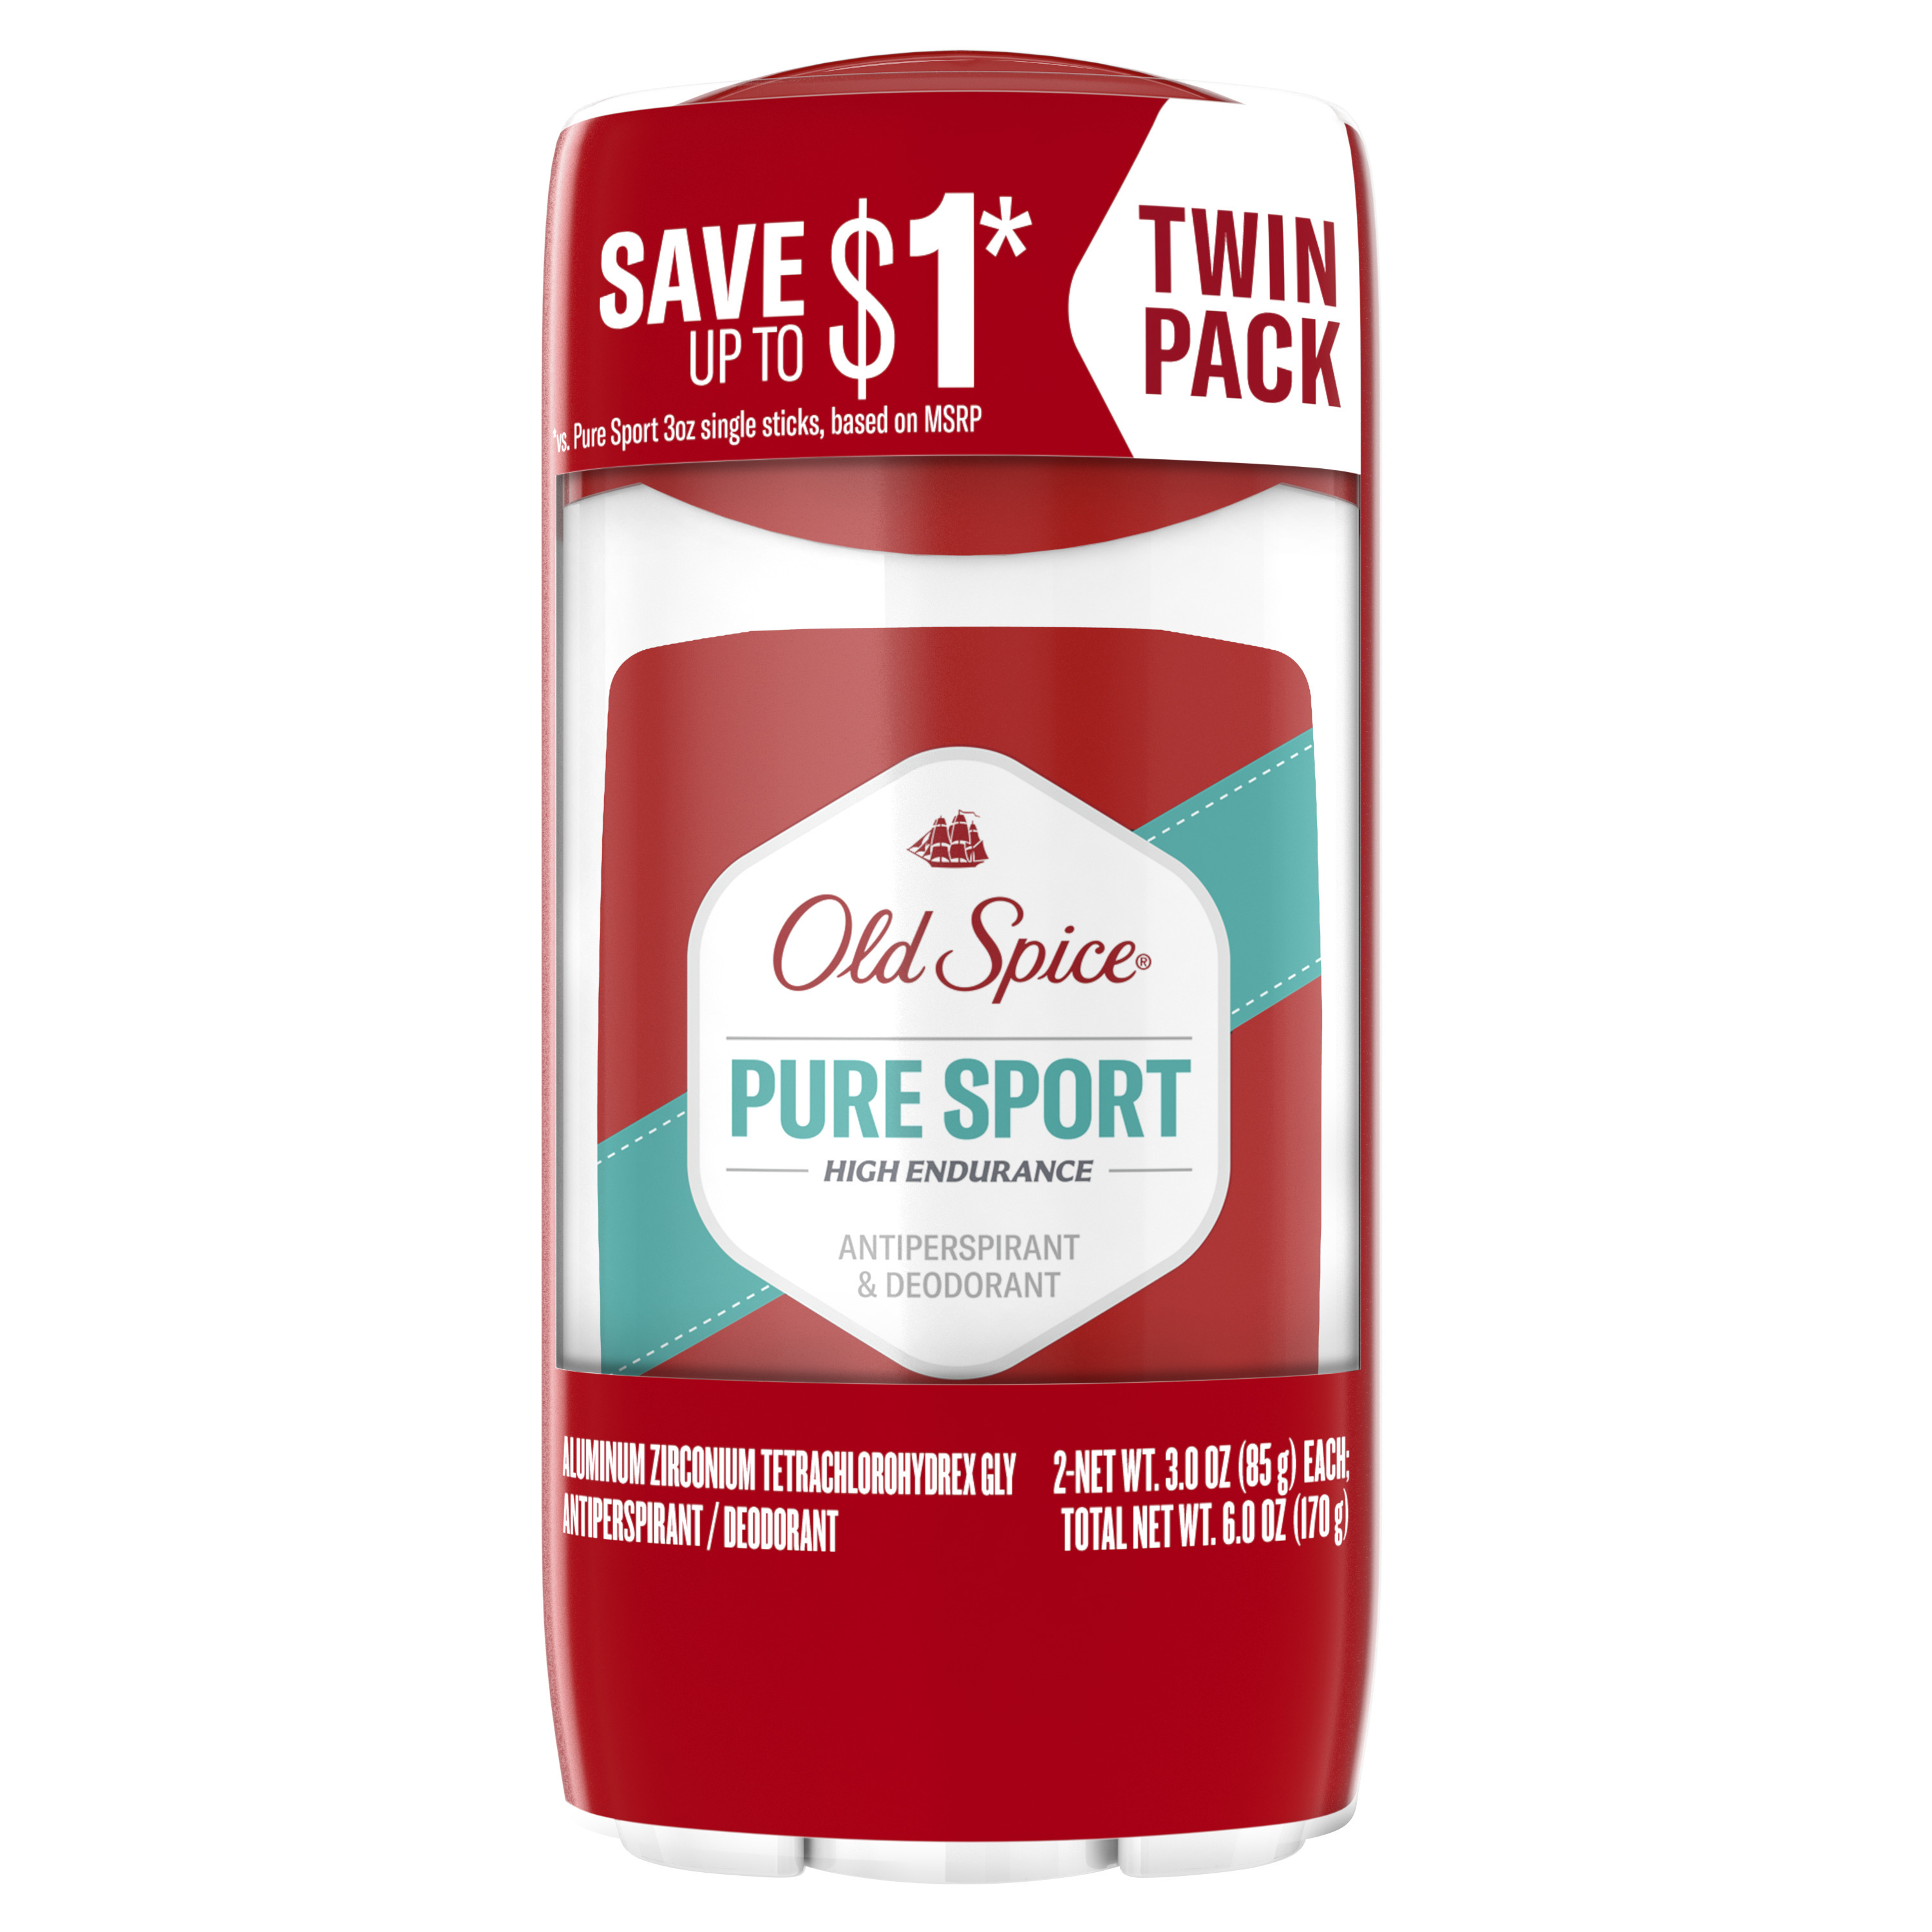 Old Spice High Endurance Antiperspirant Deodorant for Men, Pure Sport Scent, 3.0 oz Twin Pack - image 1 of 5